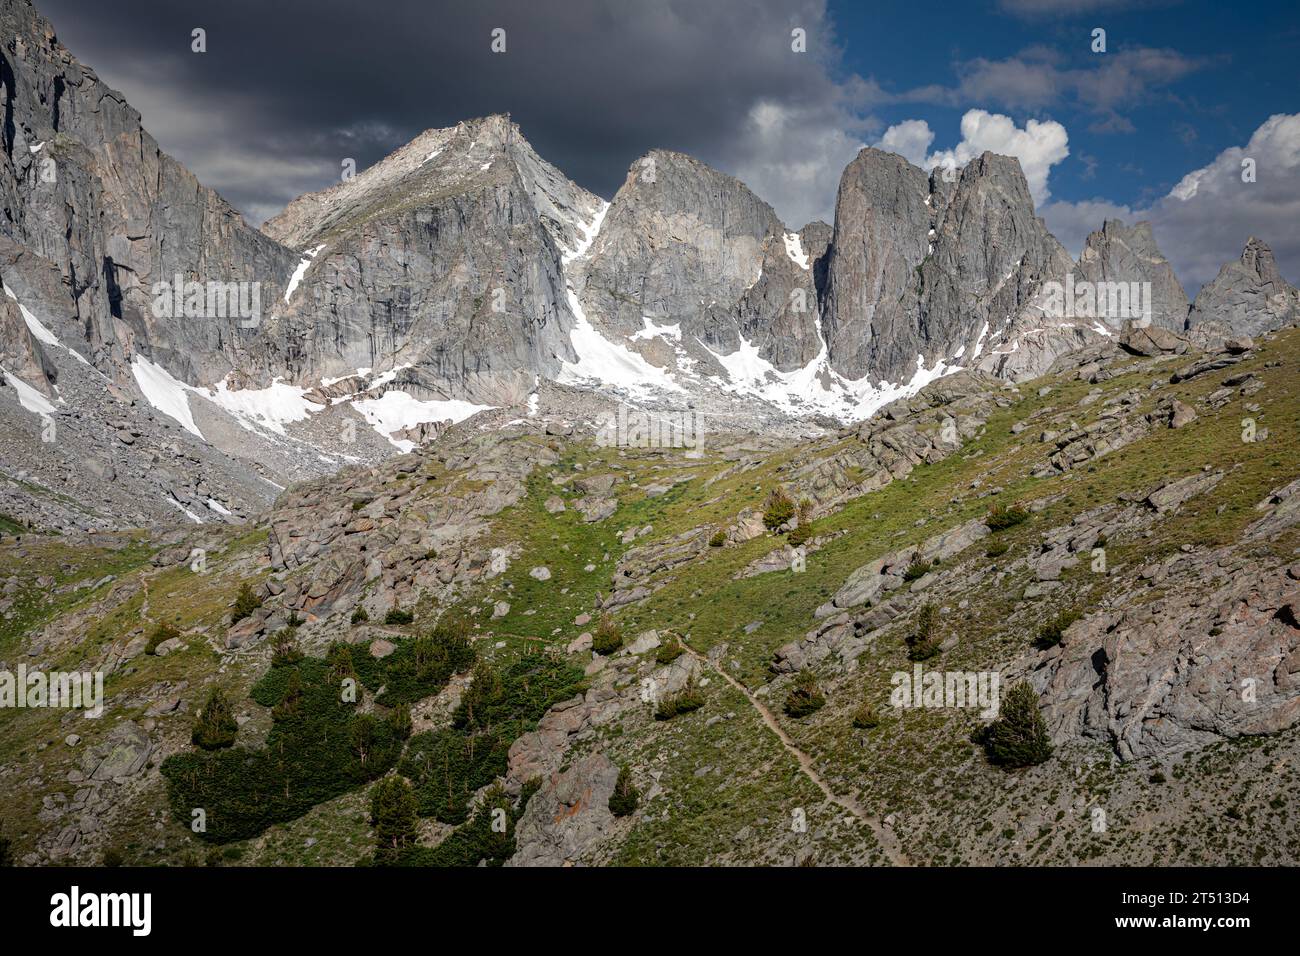 WY05604-00...WYOMING - Climber's trail to the Cirque of the Towers located above Arrowhead Lake in the Bridger Wilderness. Stock Photo